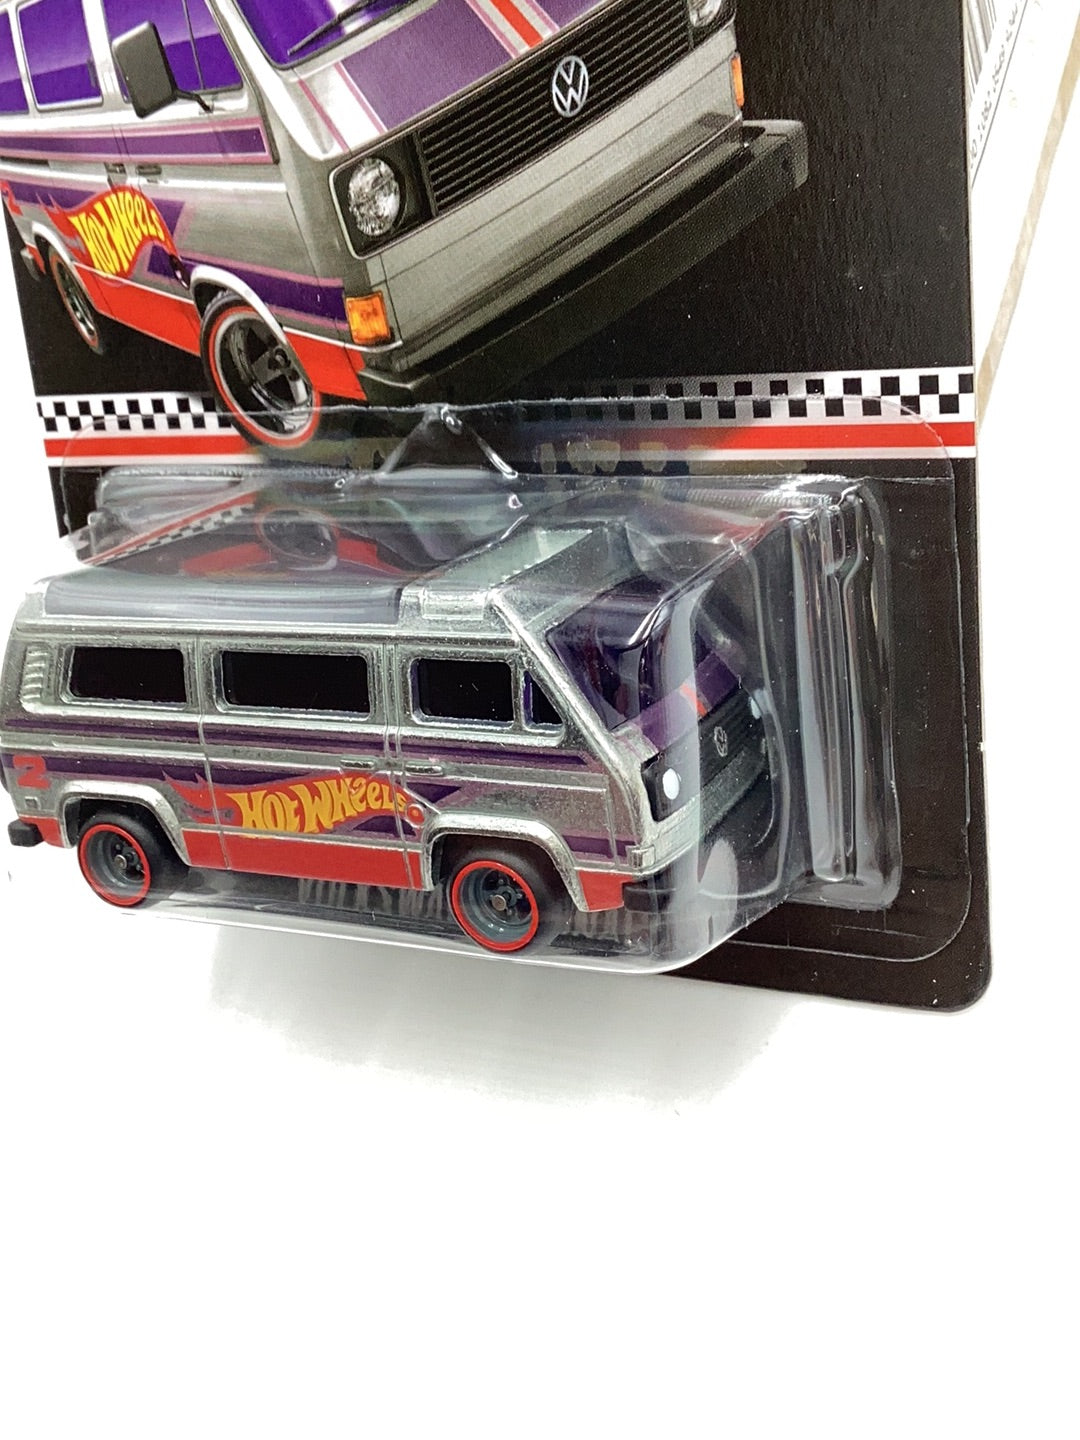 2020 Hot wheels collectors edition Volkswagen Sunagon mail in Zamac edition Real Riders